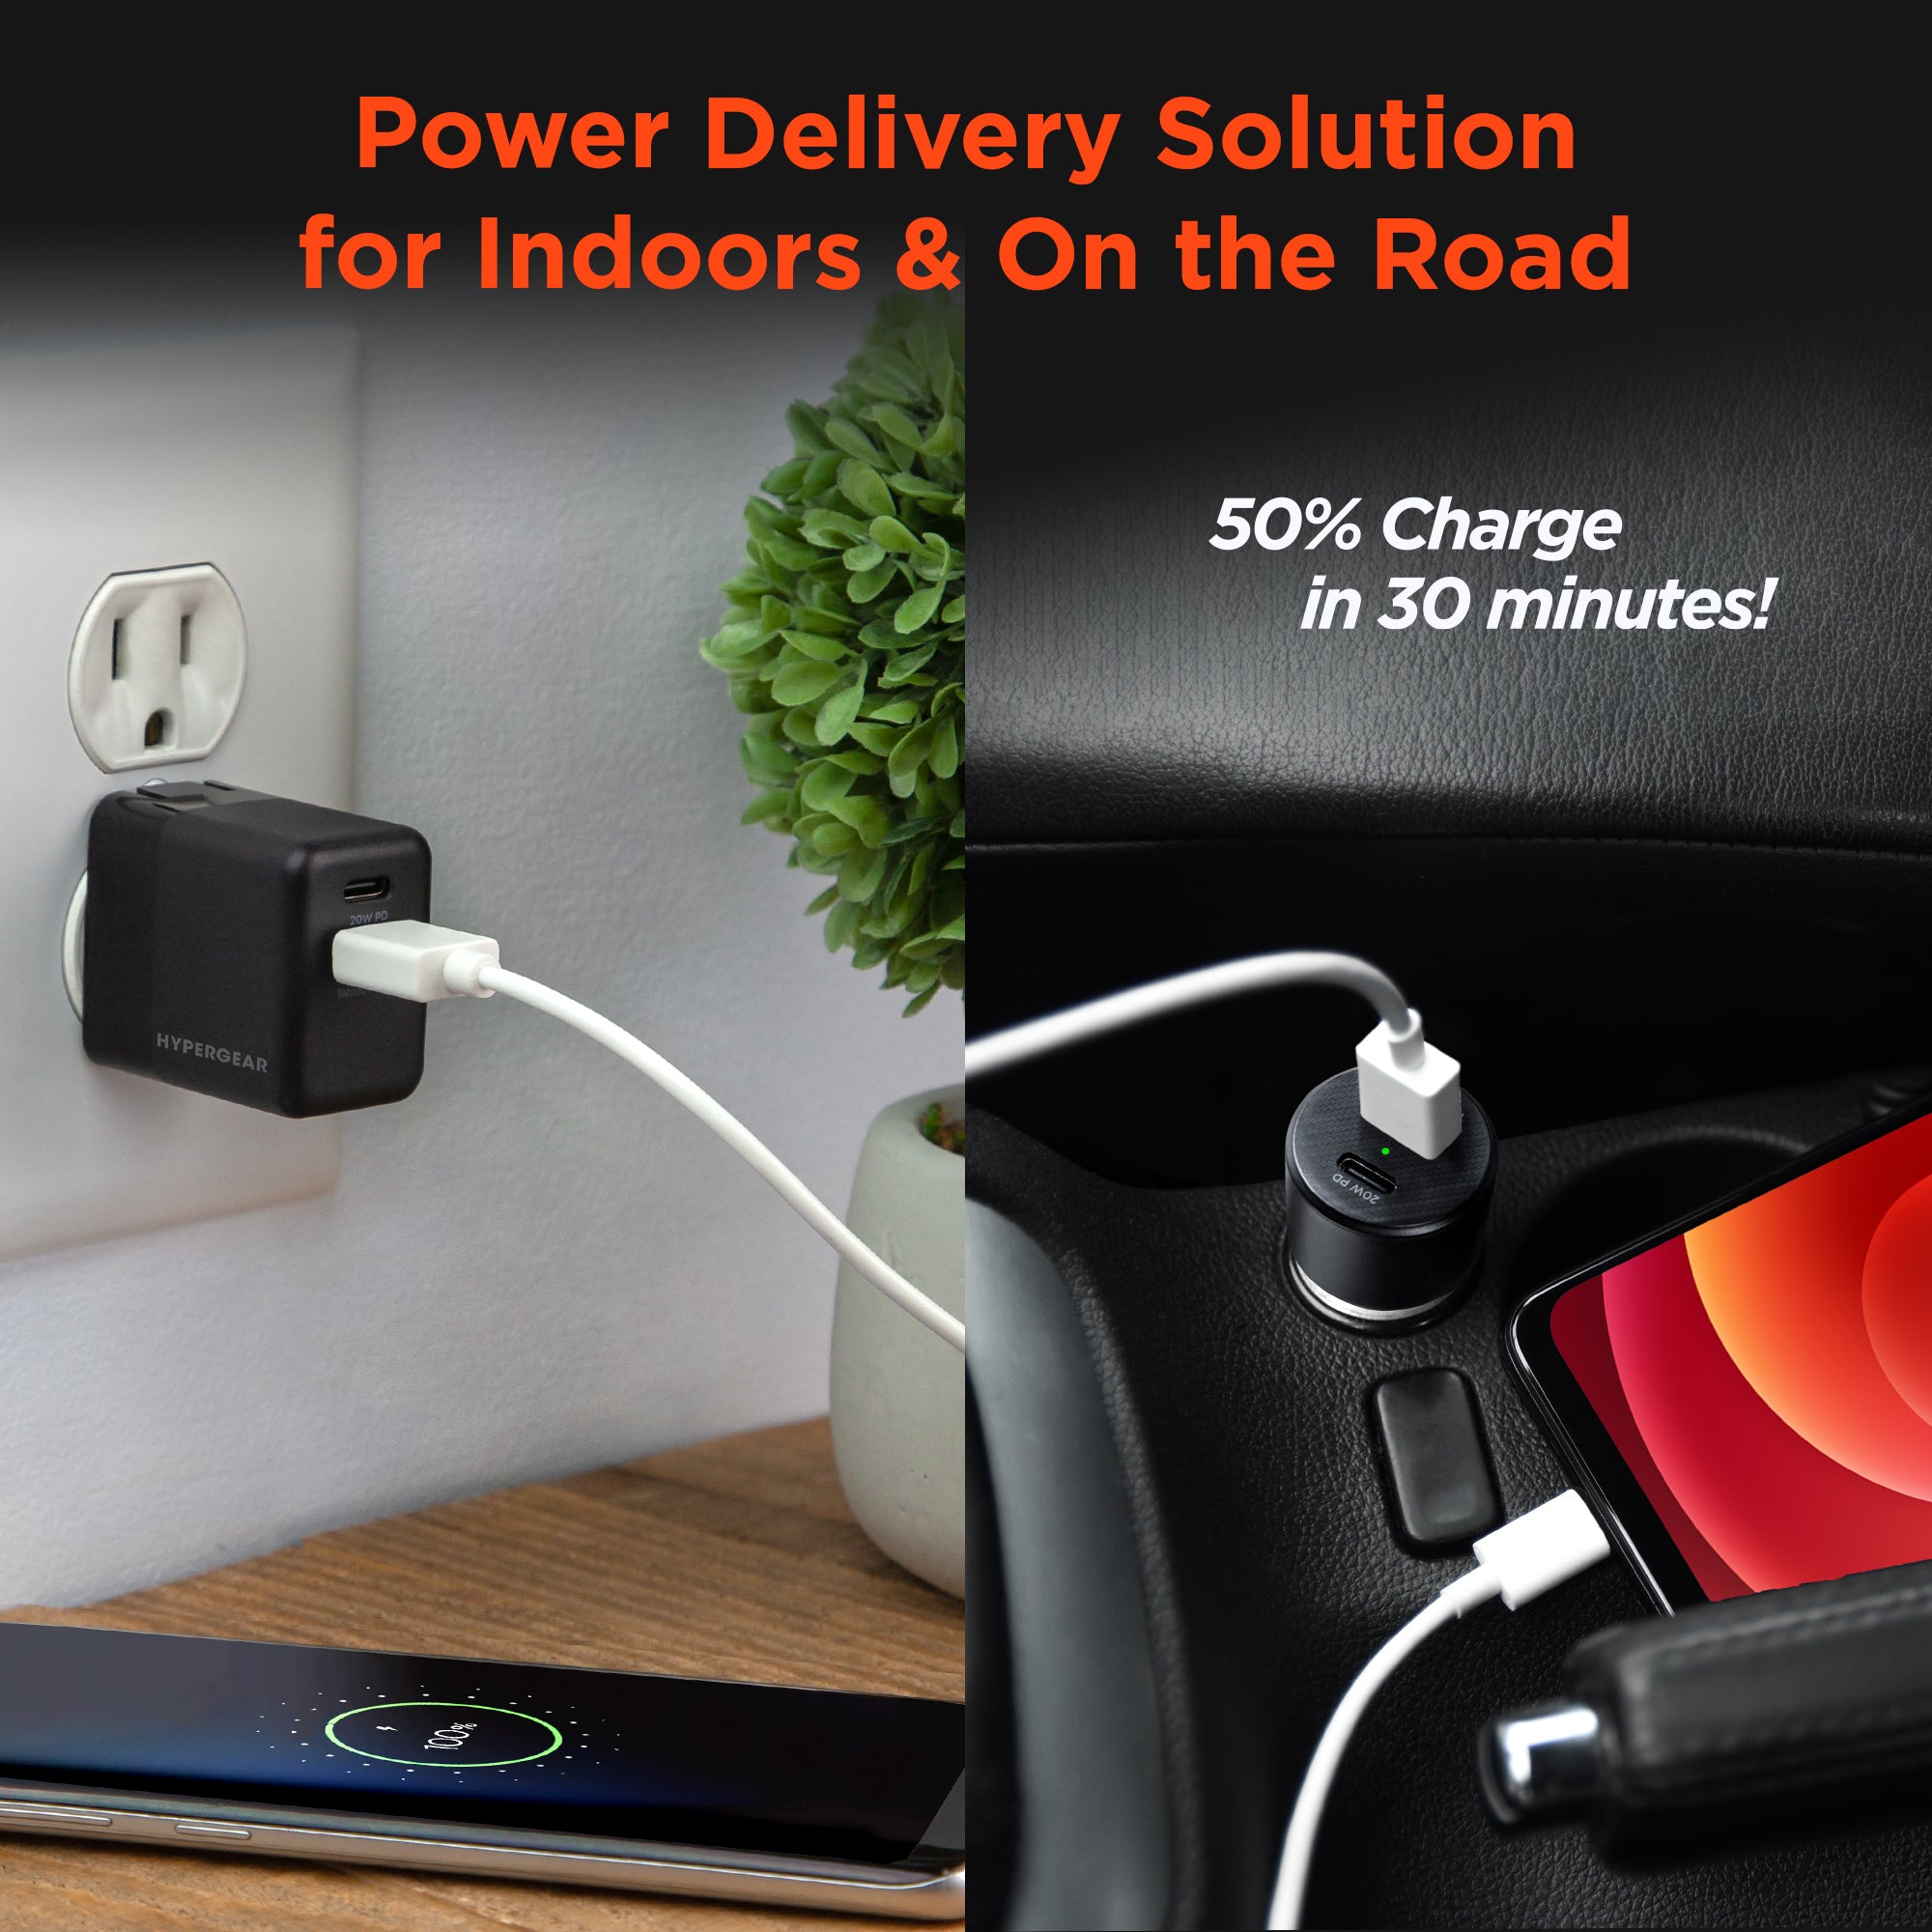 USB-C Power Delivery Bundle | 20W USB-C PD + 12W USB Fast Wall Charger and Fast Car Charger | Black